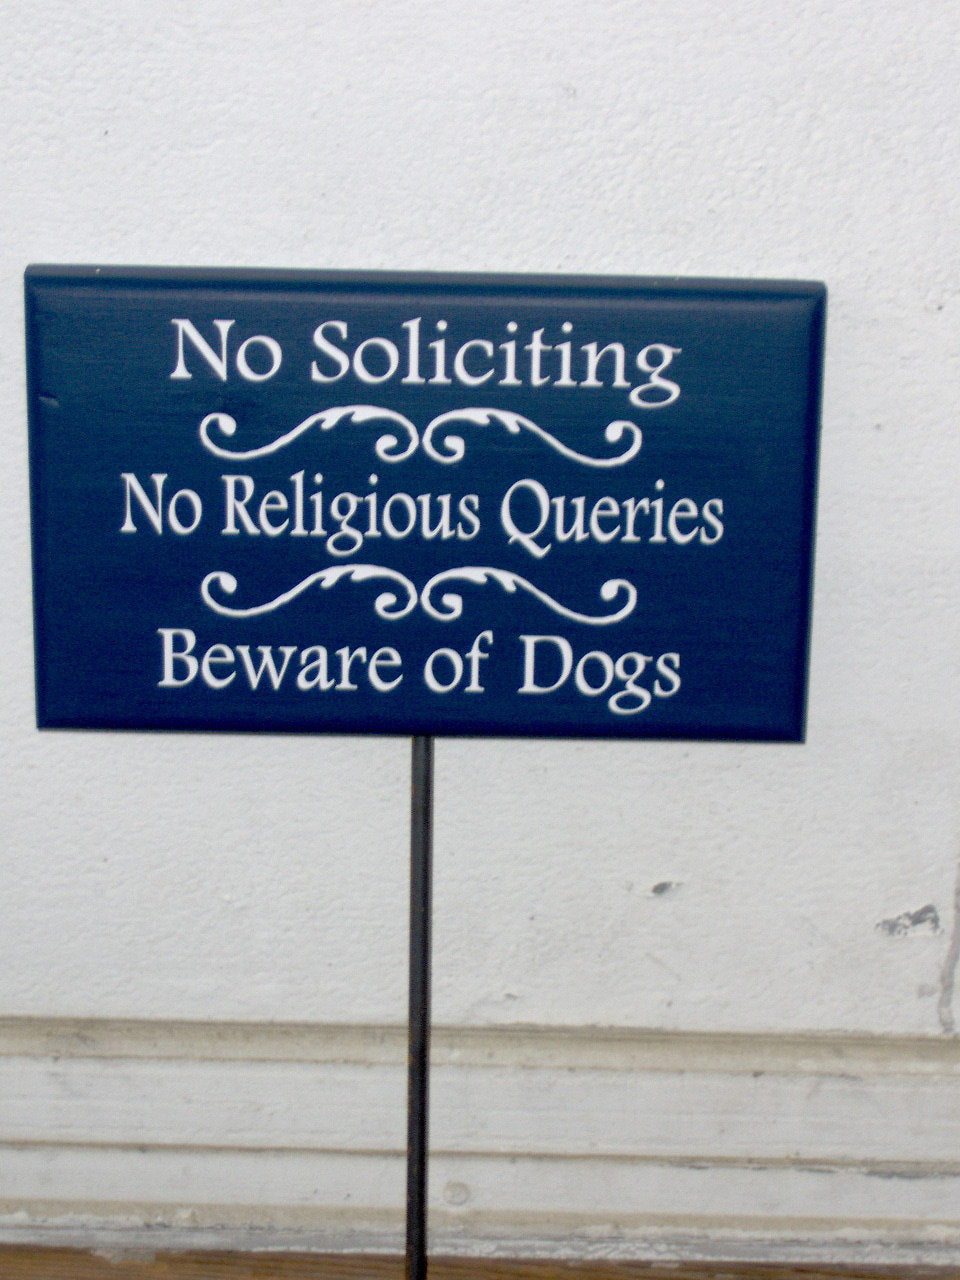 No Soliciting No Religious Queries Beware of Dogs Wood Vinyl Yard Stake Sign Navy Blue Security Yard Sign Entryway Modern Home Outdoor Decor - Heartfelt Giver